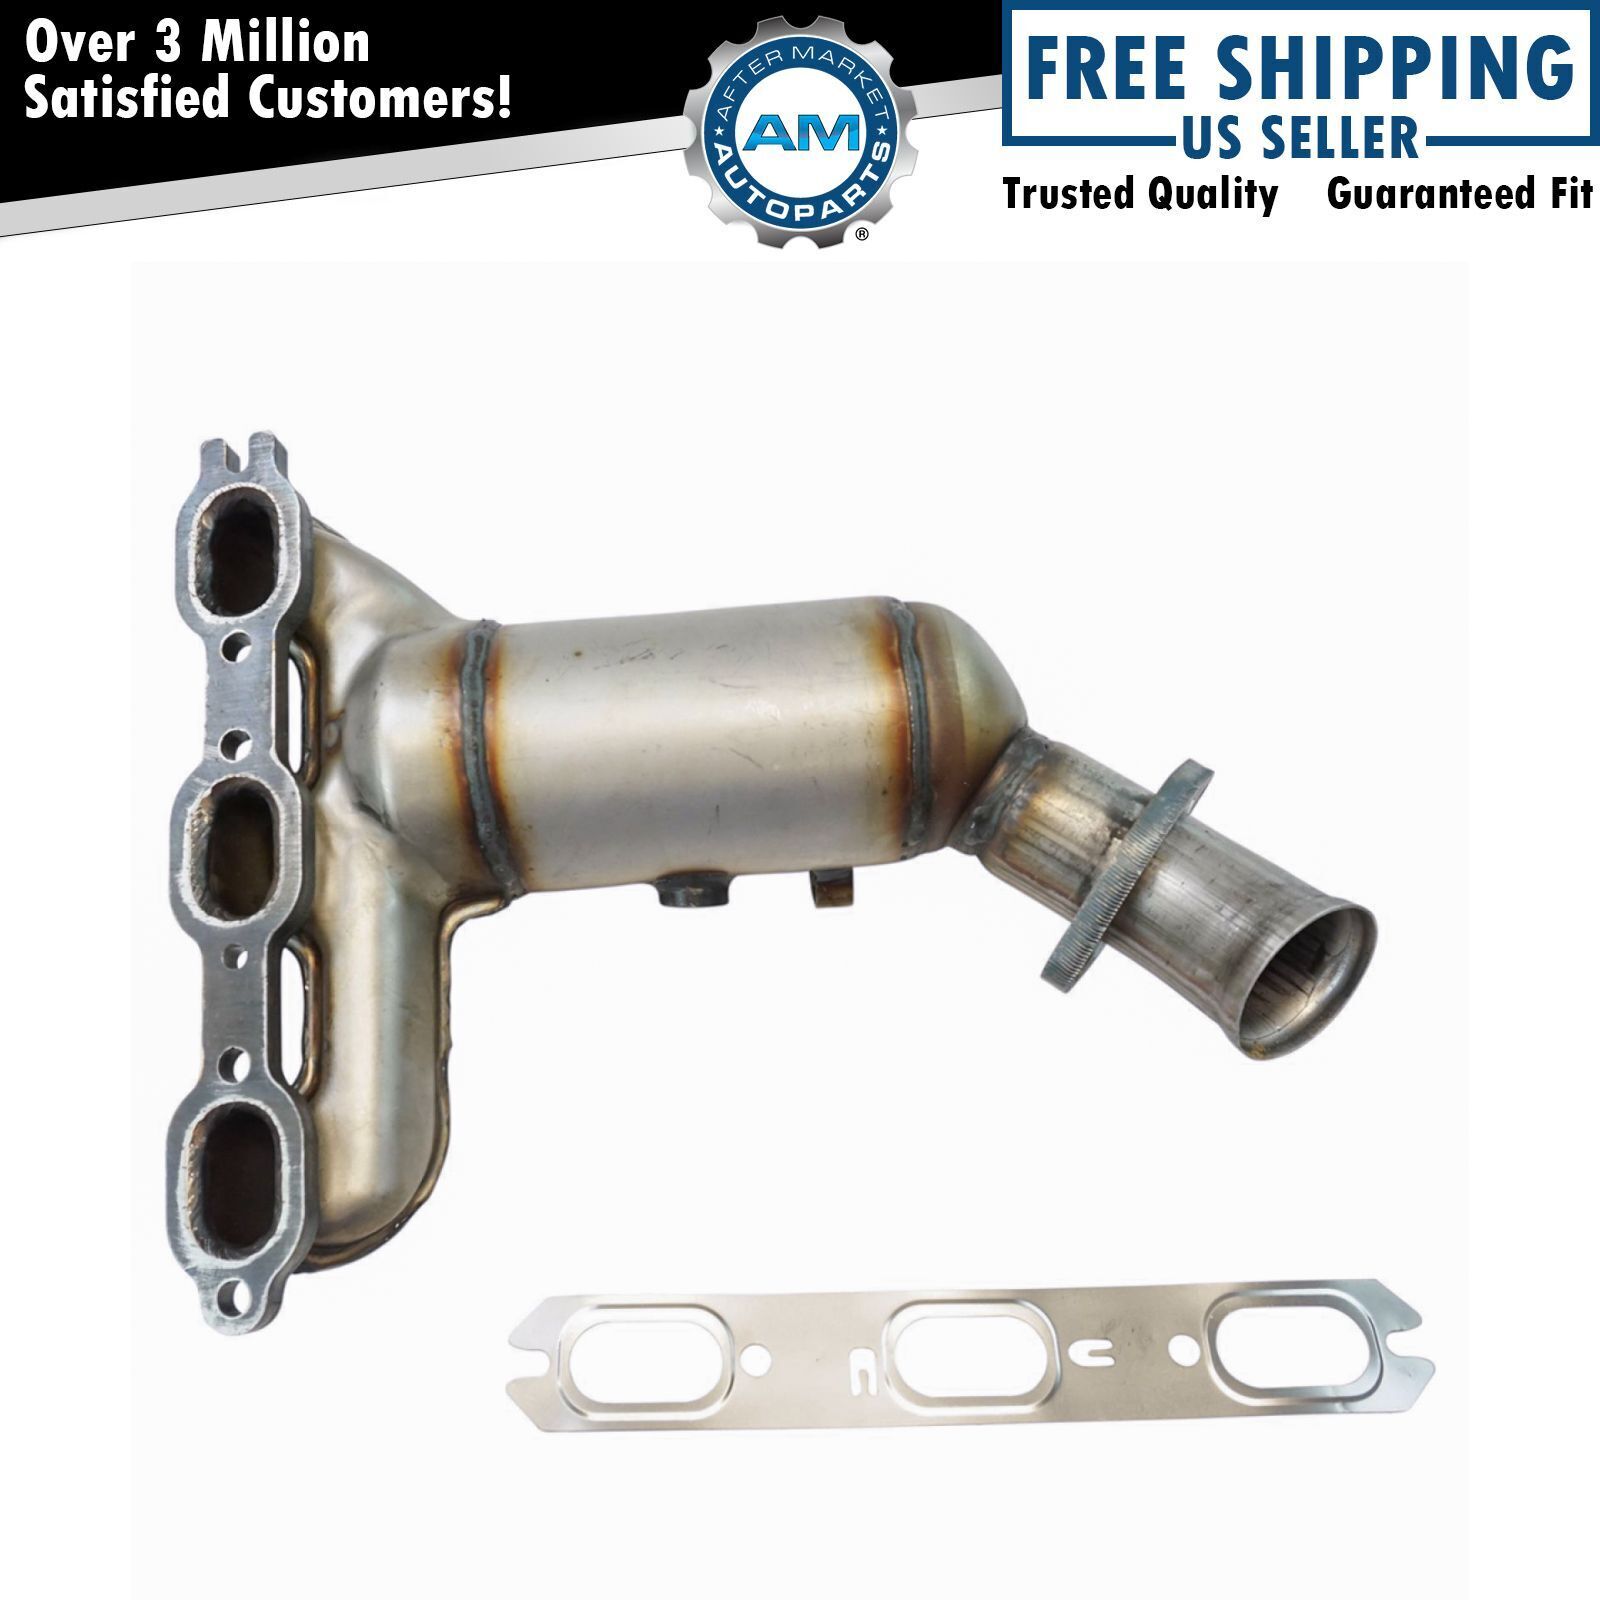 Front Exhaust Manifold with Catalytic Converter & Gasket for Dodge Chrysler New